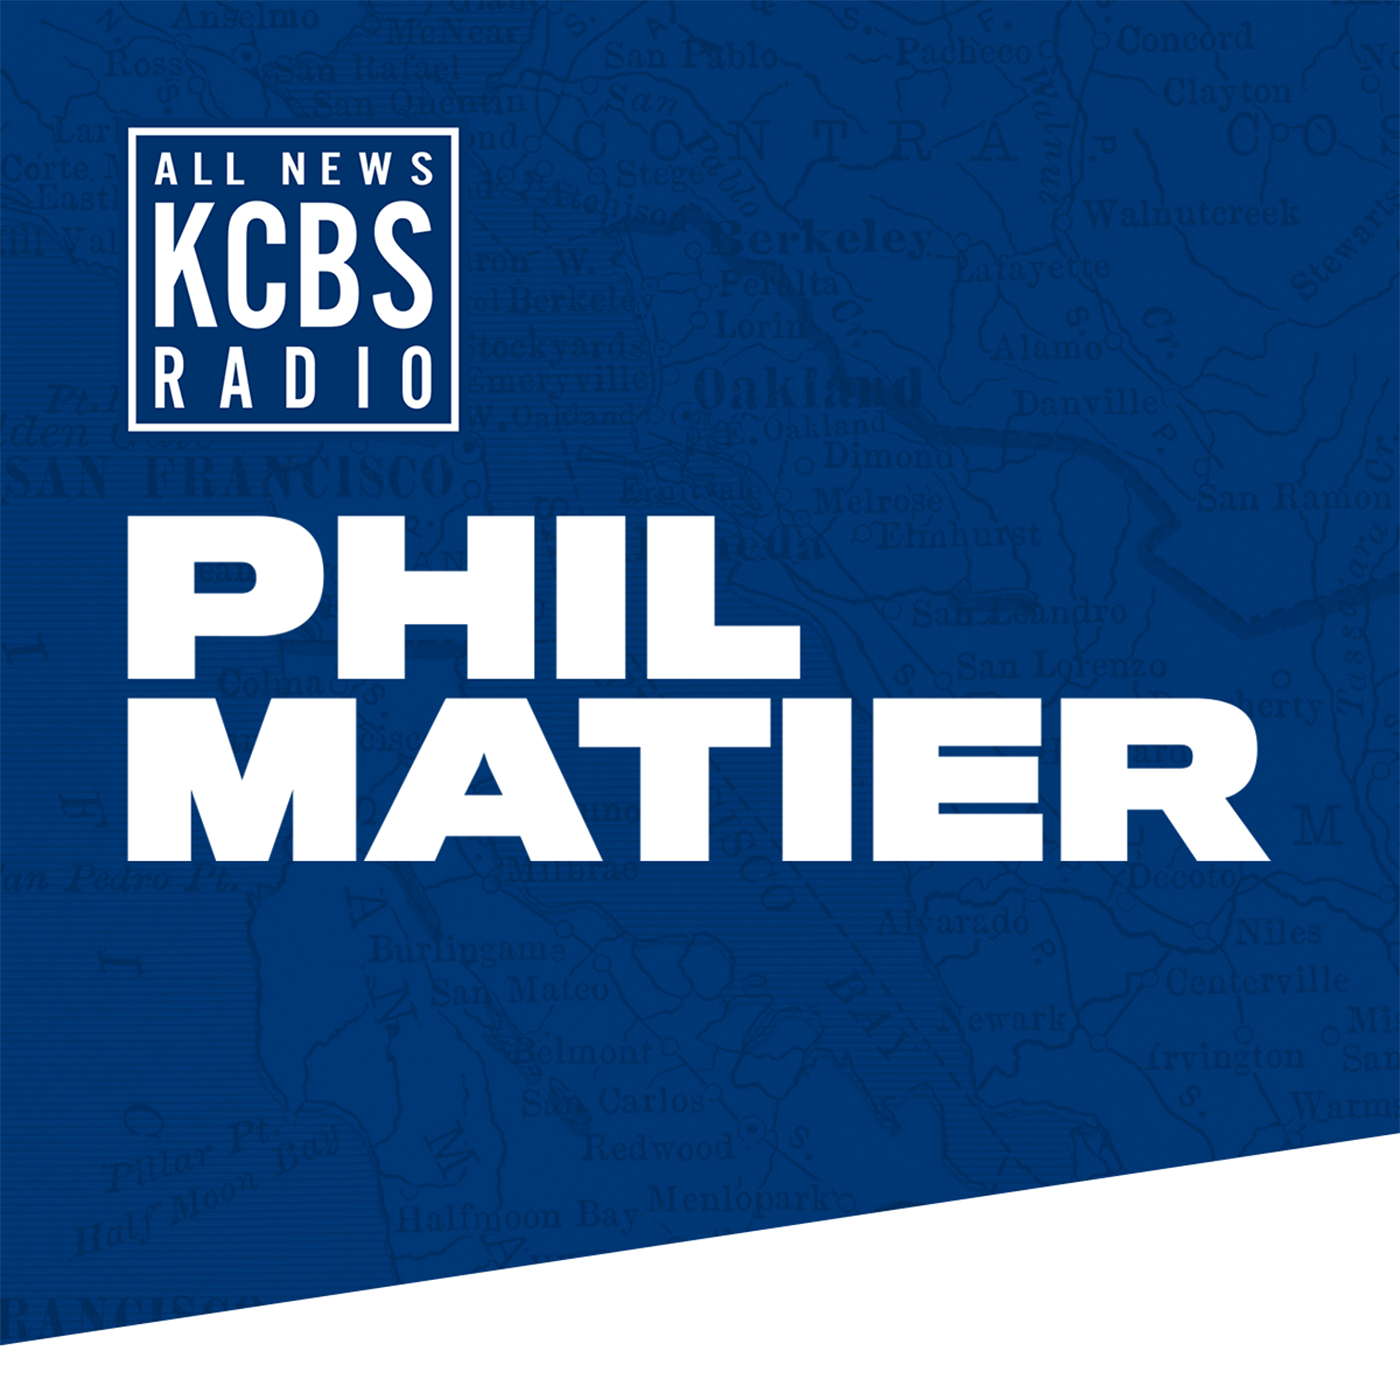 Phil Matier: Sports betting in California in the hands of the voters